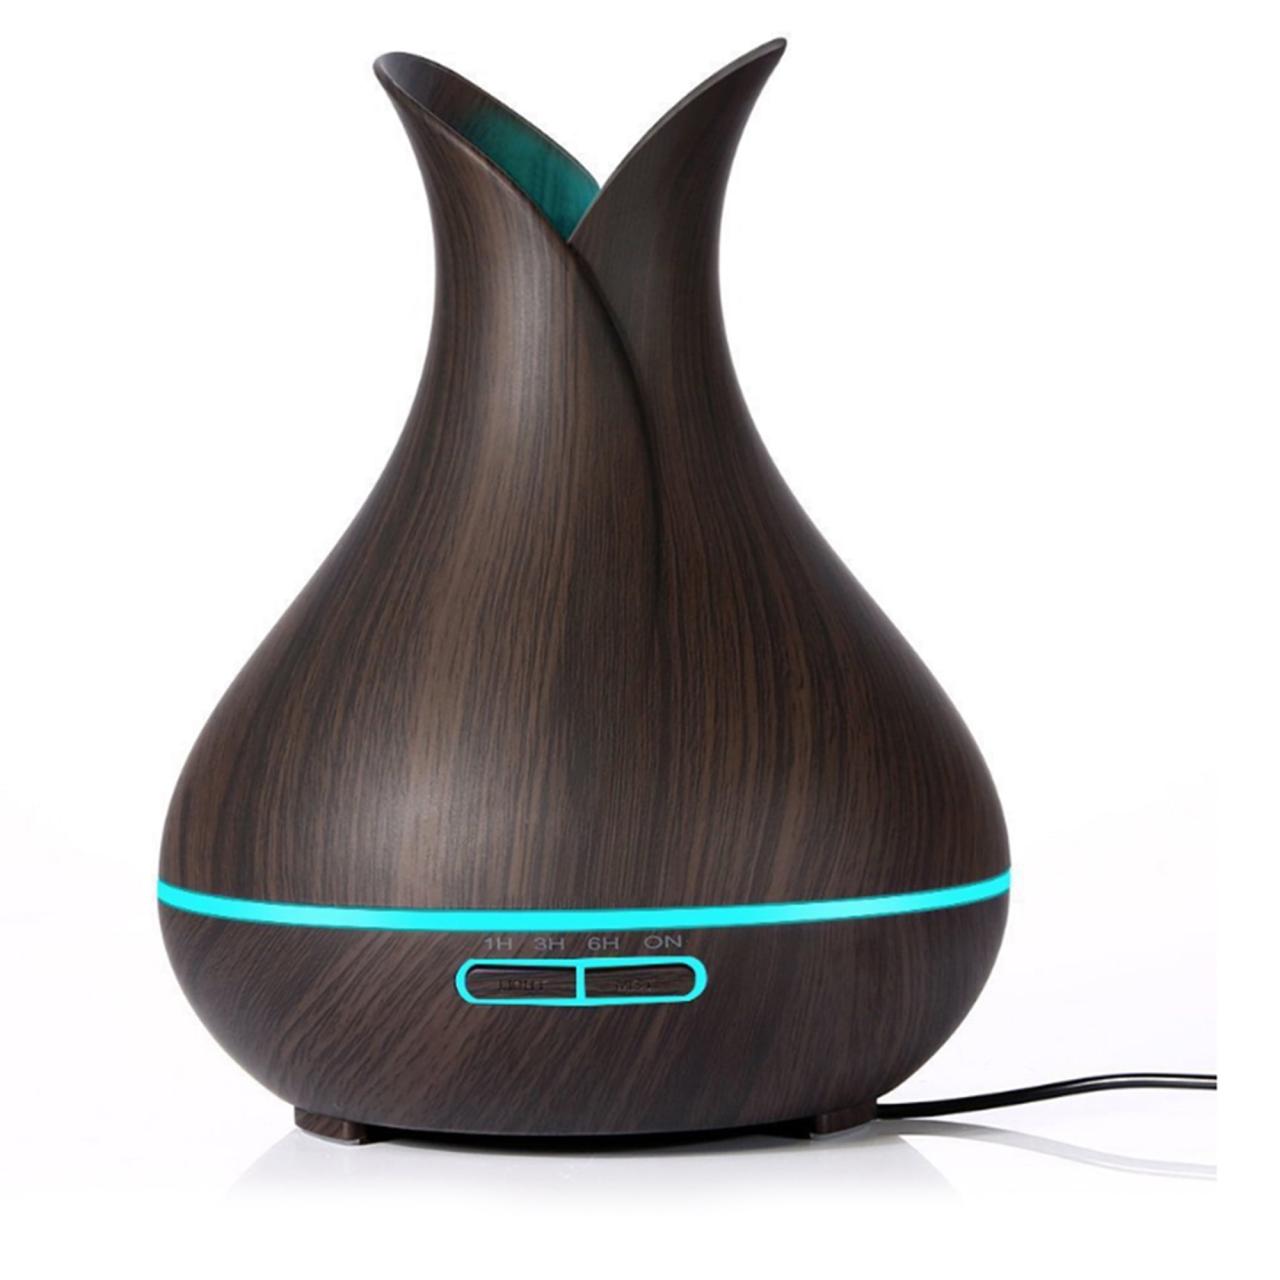 Ultrasonic aromatherapy diffuser by hubmar